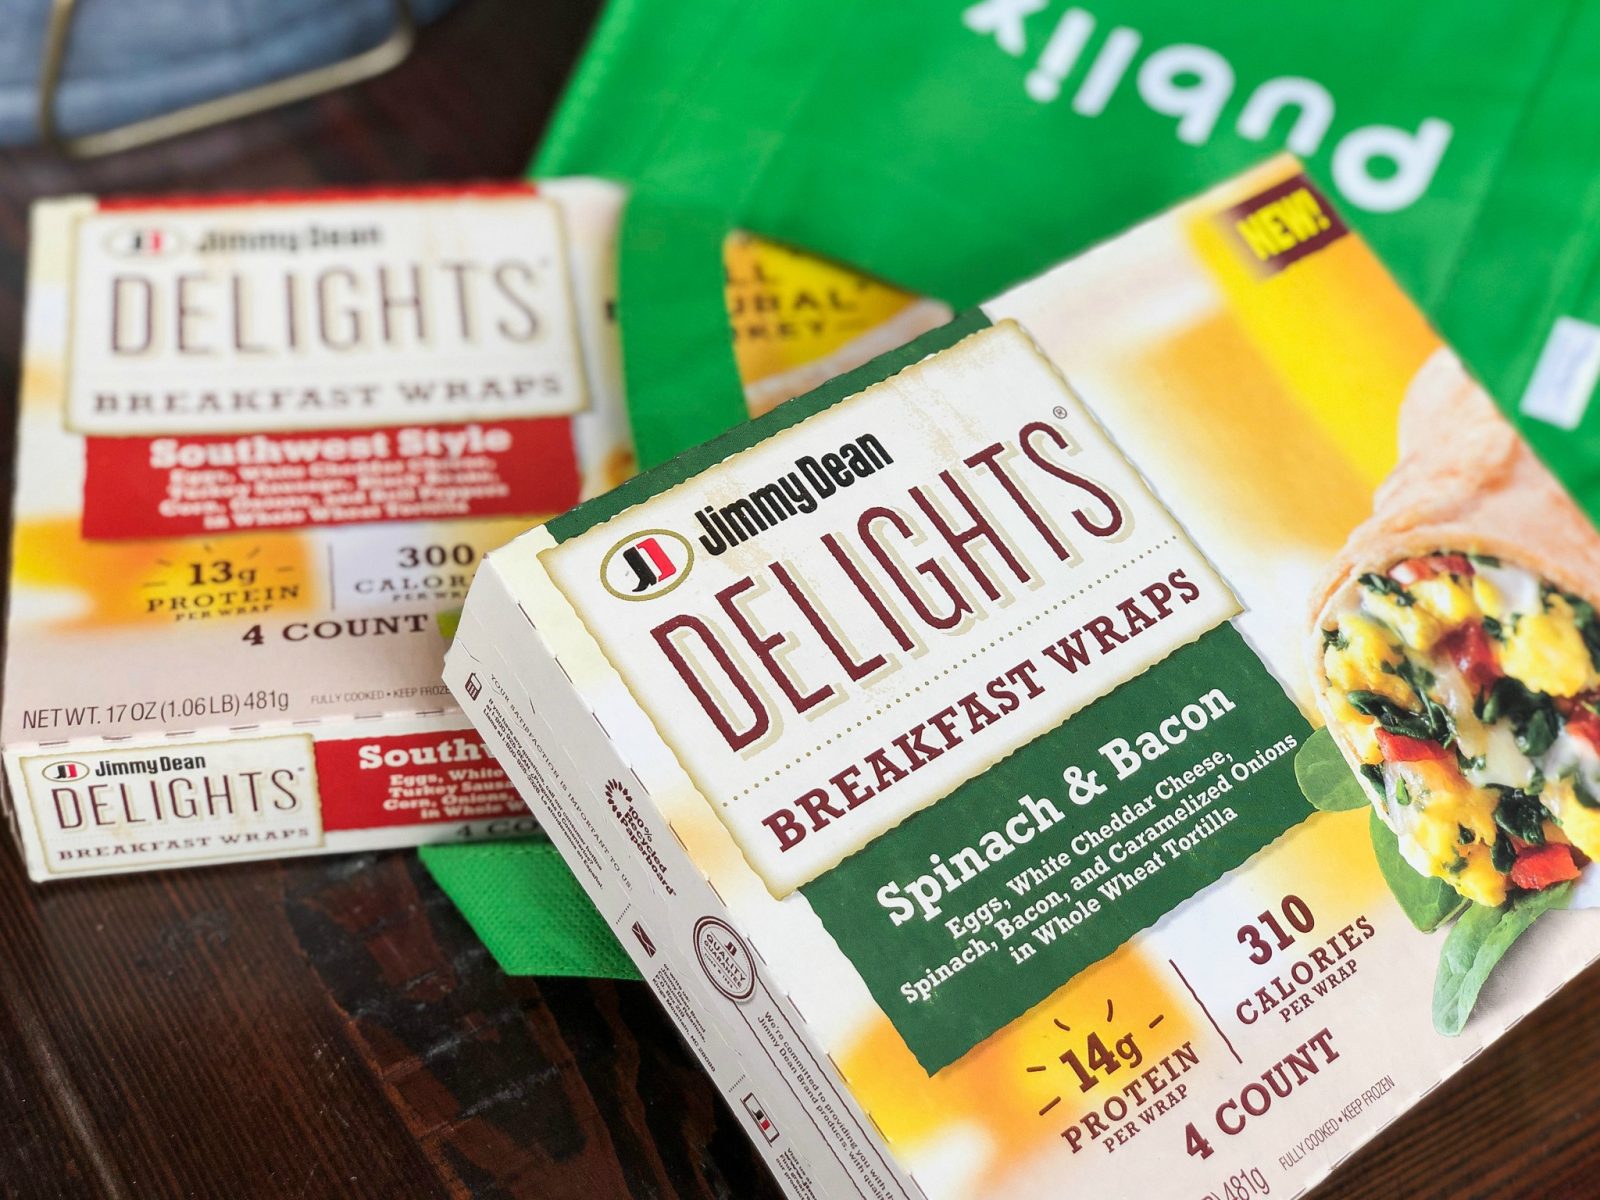 Don’t Miss Your Chance To Try New Jimmy Dean Delights® Breakfast Wraps – Clip Your Coupon!